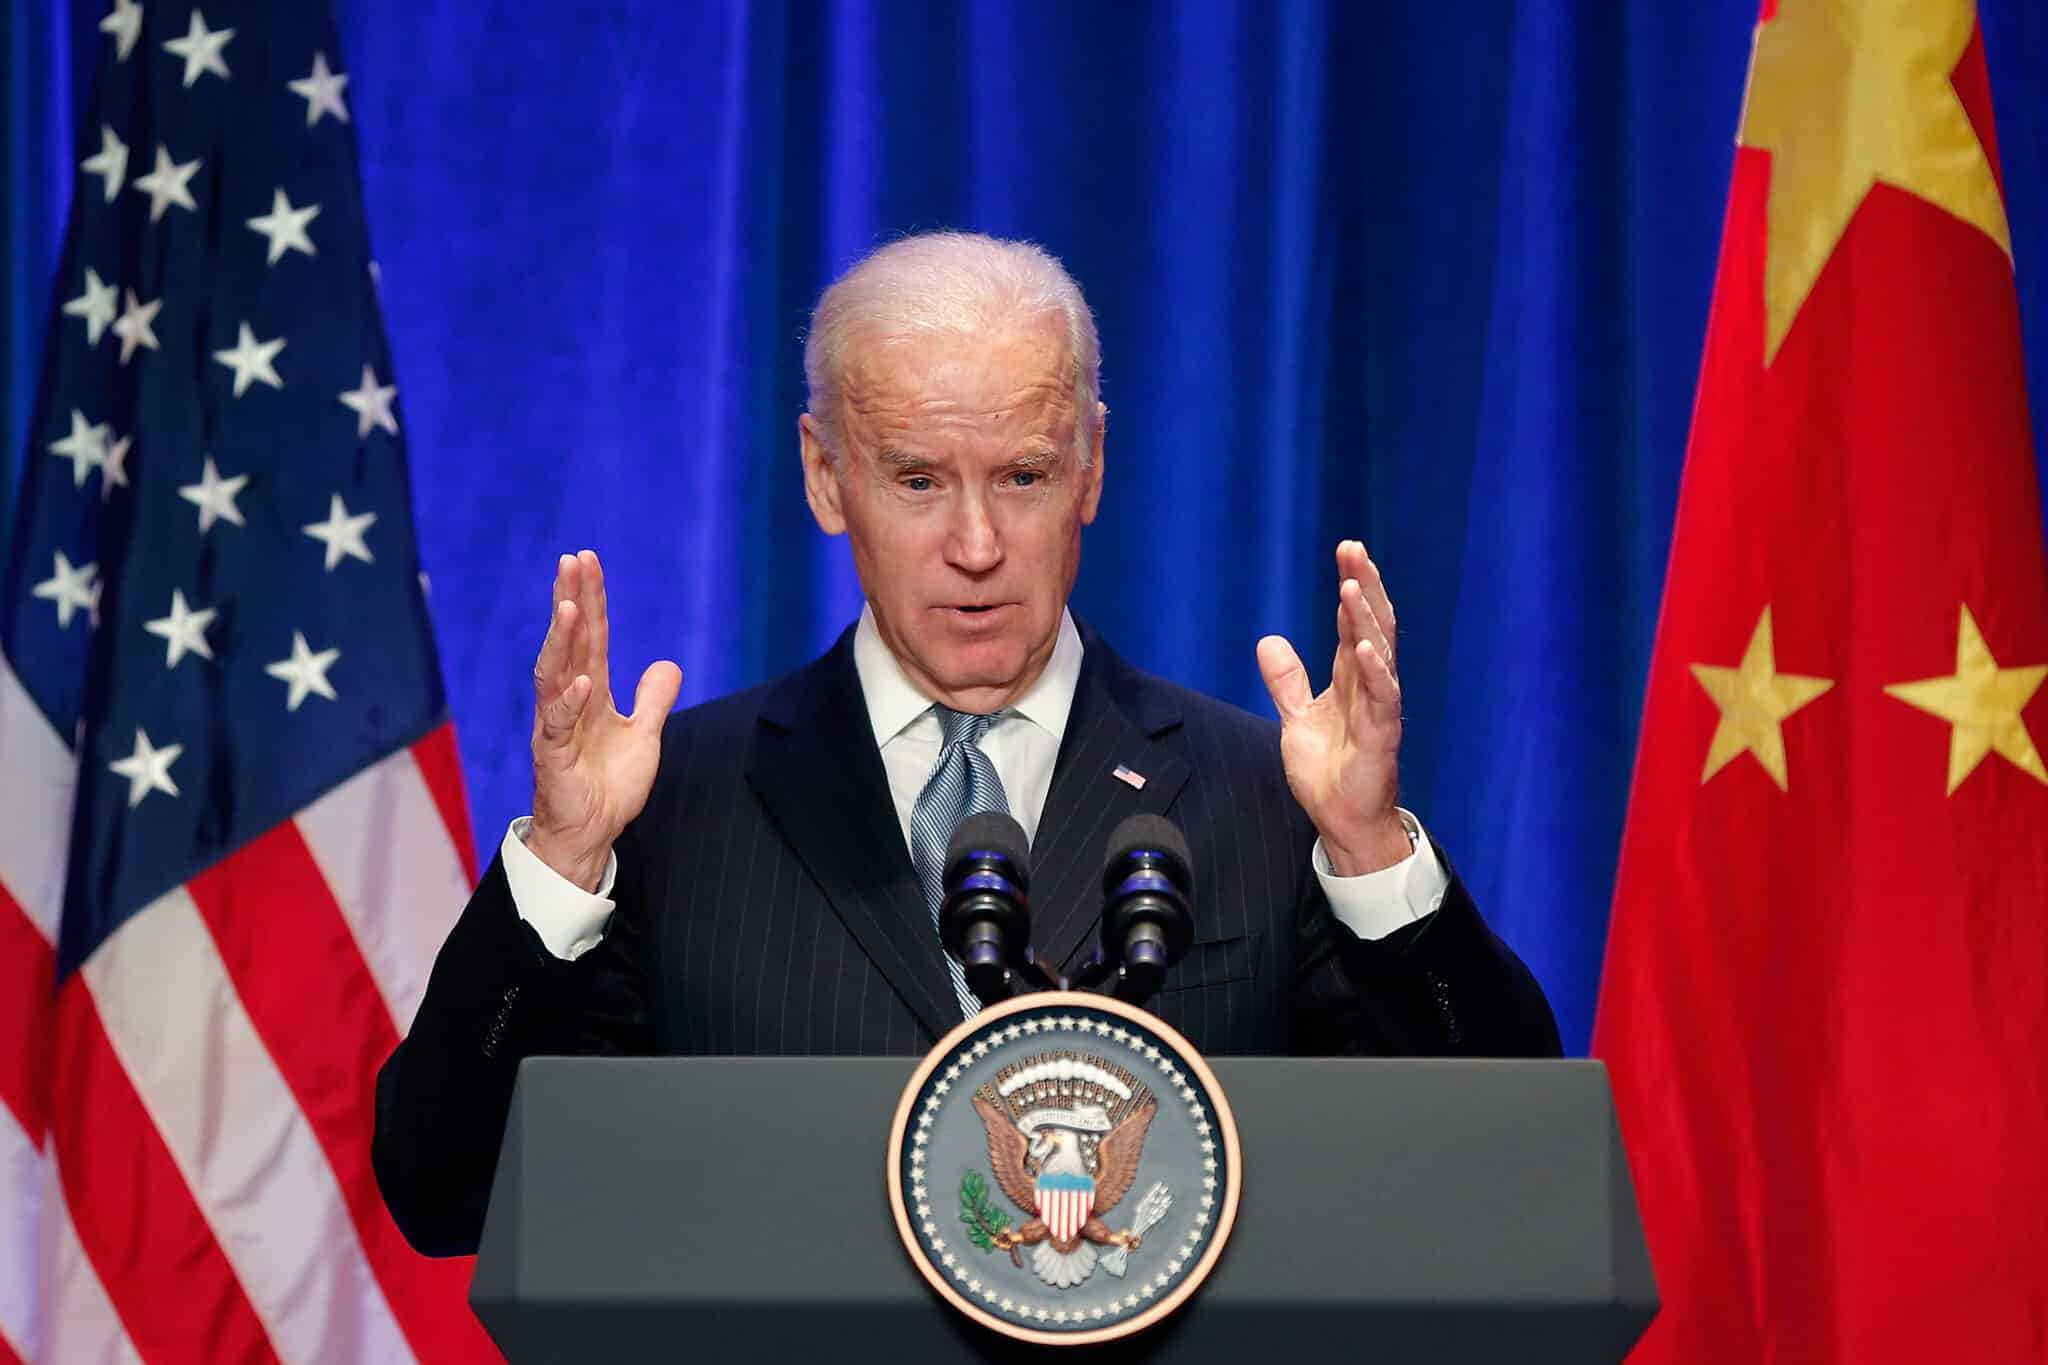 BEIJING, CHINA - DECEMBER 05:  U.S Vice President Joe Biden speaks at a business leader breakfast at the The St. Regis Beijing hotel on December 5, 2013 in Beijing, China. U.S Vice President Joe Biden is on an official visit to China from December 4 to 5.  (Photo by Lintao Zhang/Getty Images)